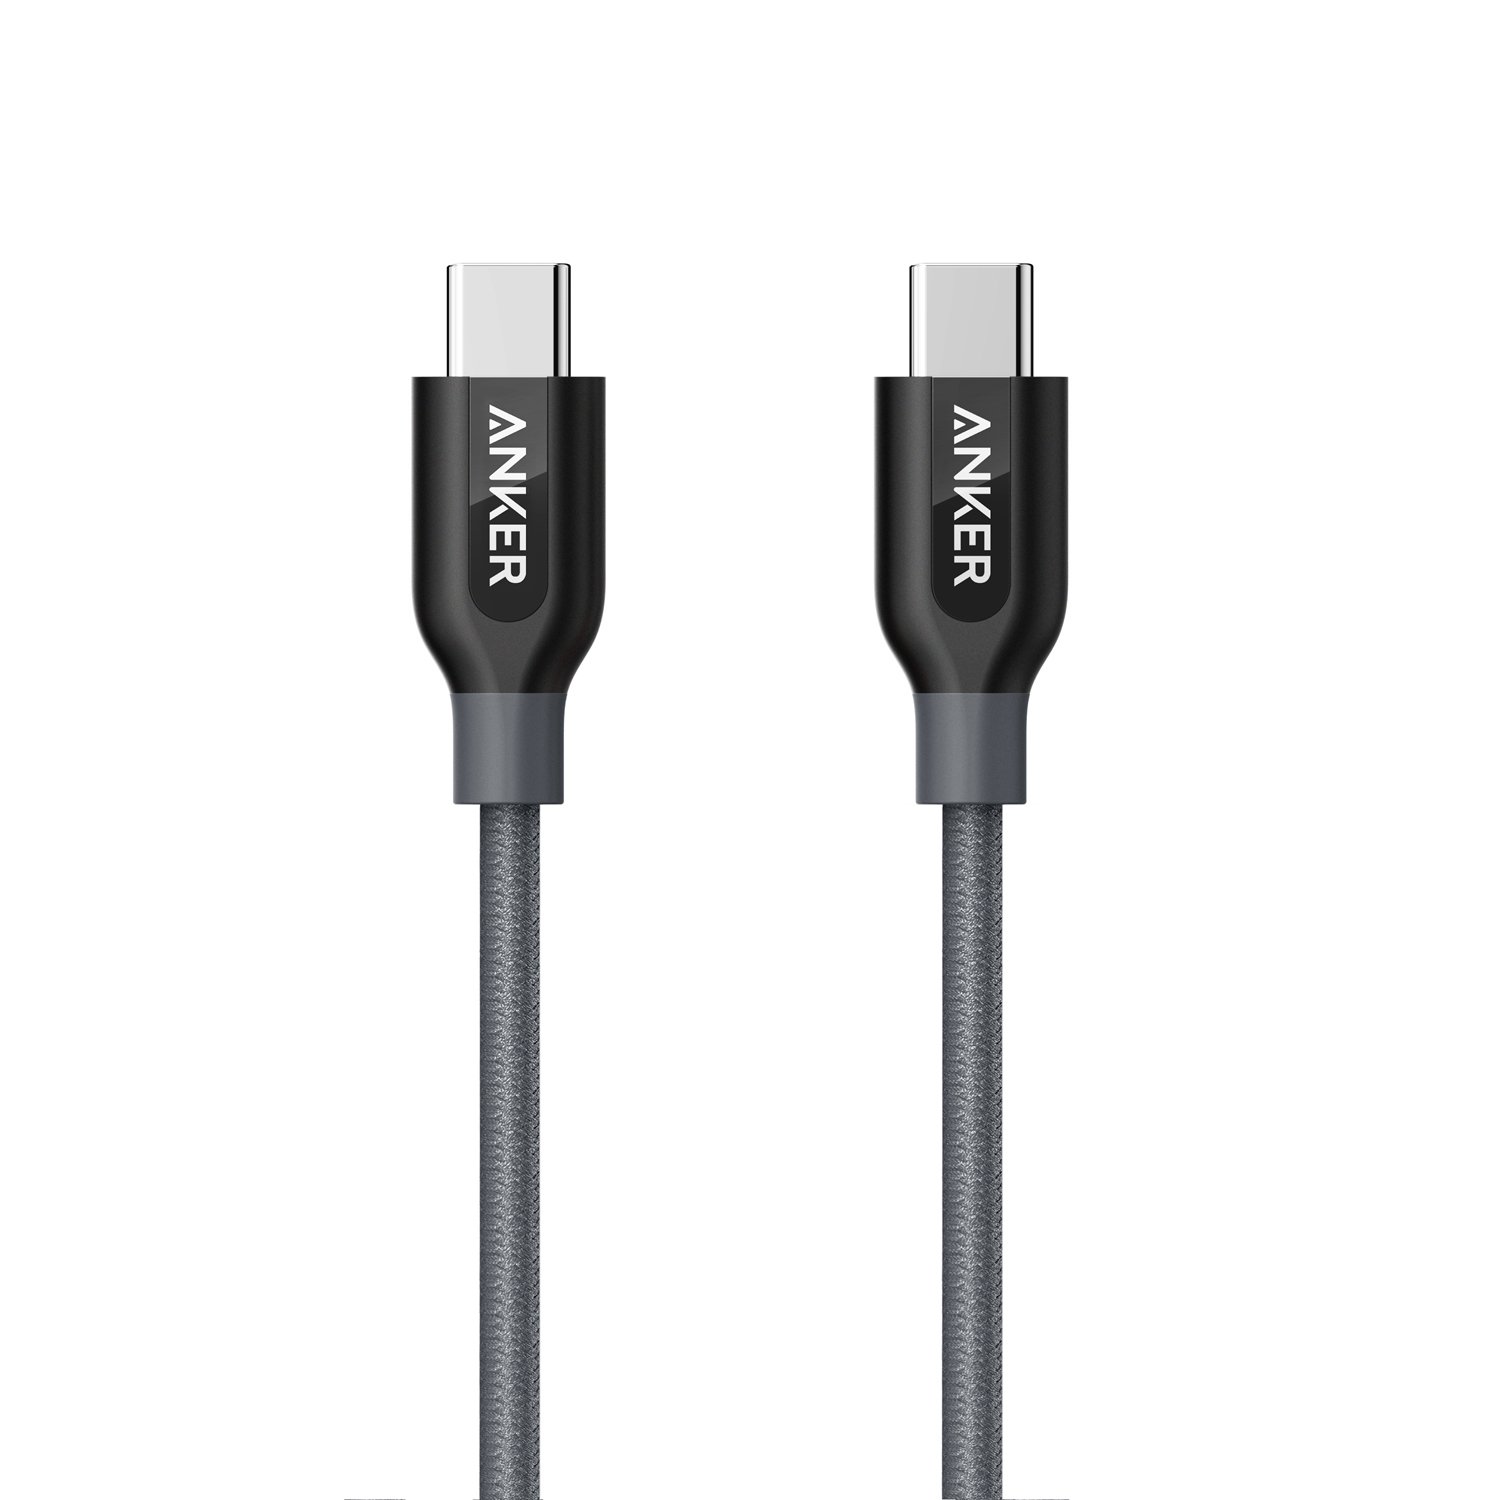 Top 5 Best USB C to USB C Cable Reviews in 2020 – BestemsGuide